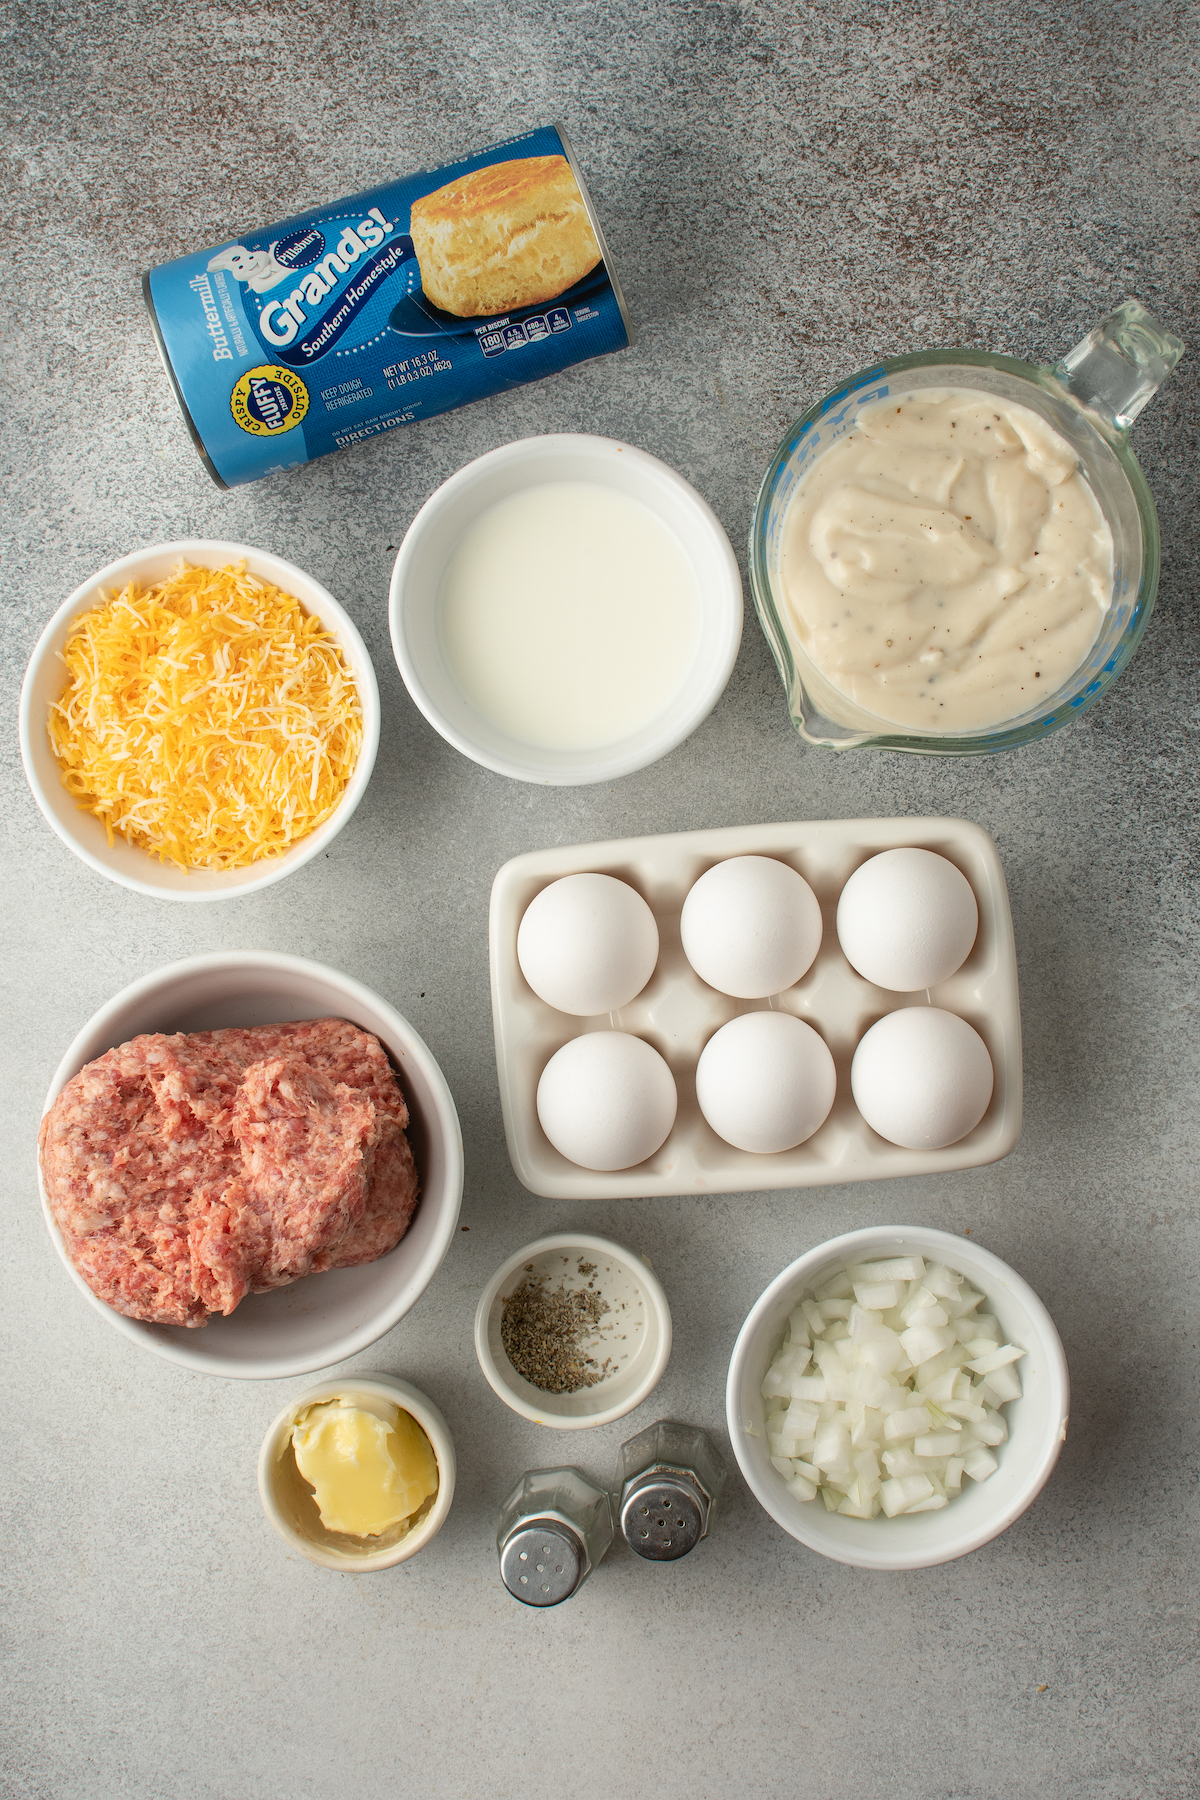 Ingredients for biscuits and gravy casserole.